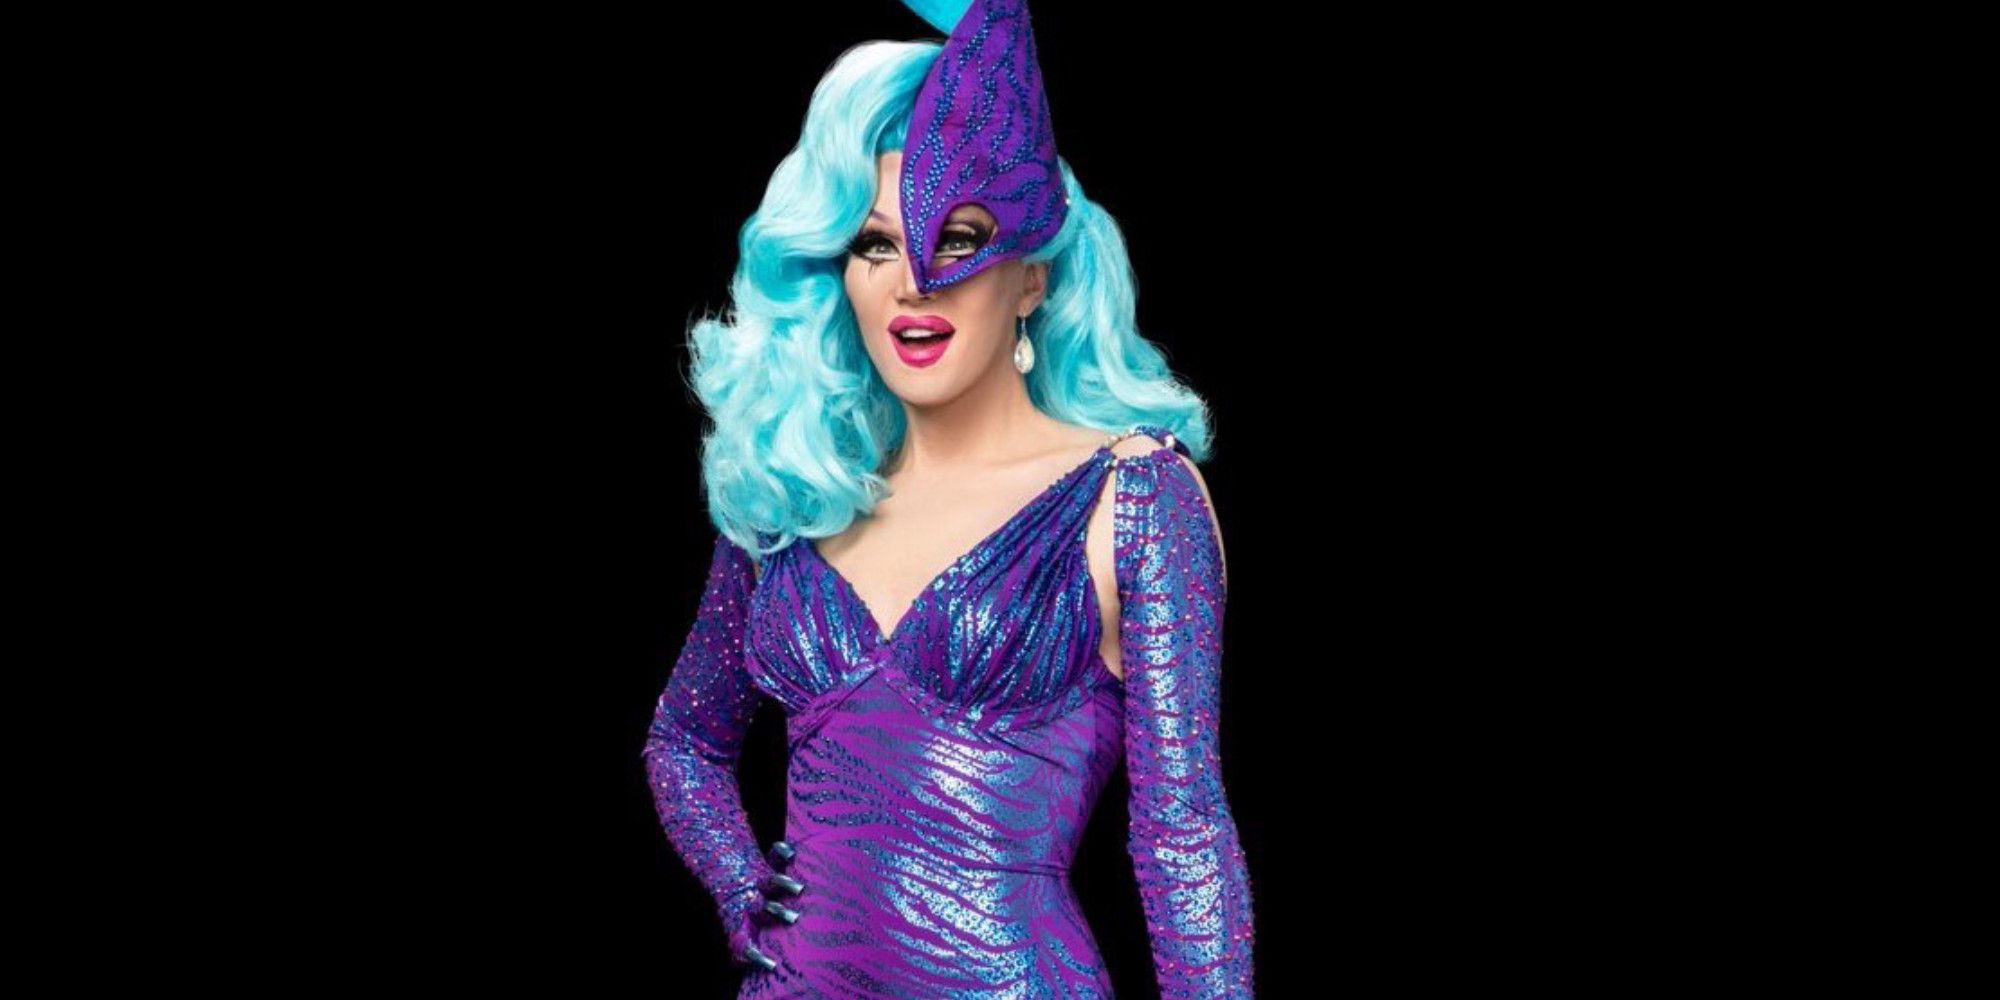 Drag queen Charlie Hides poses in a promo image for RuPaul's Drag Race season 9.